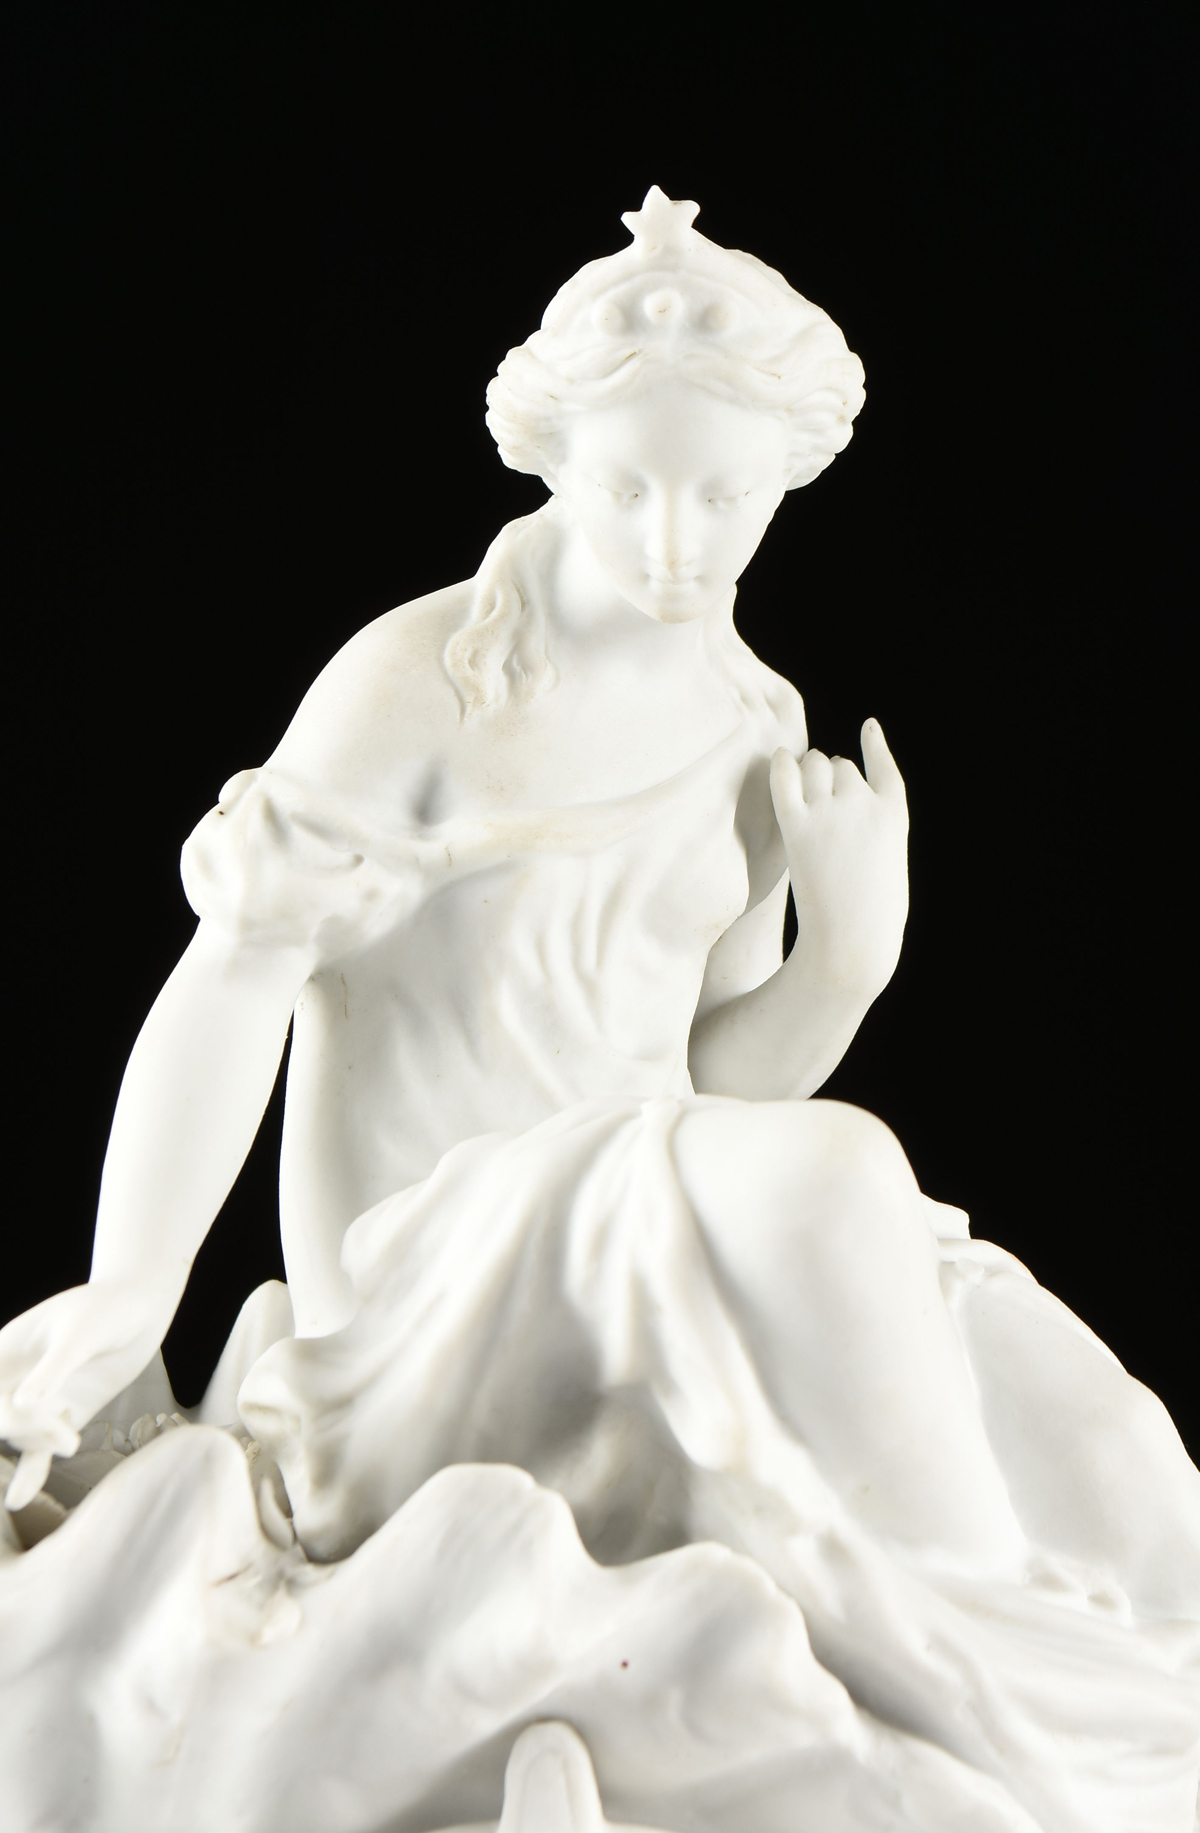 A BAROQUE REVIVAL BISQUE PORCELAIN FIGURAL GROUPING, "Allegory of Spring," POSSIBLY GERMAN, LATE - Image 2 of 11